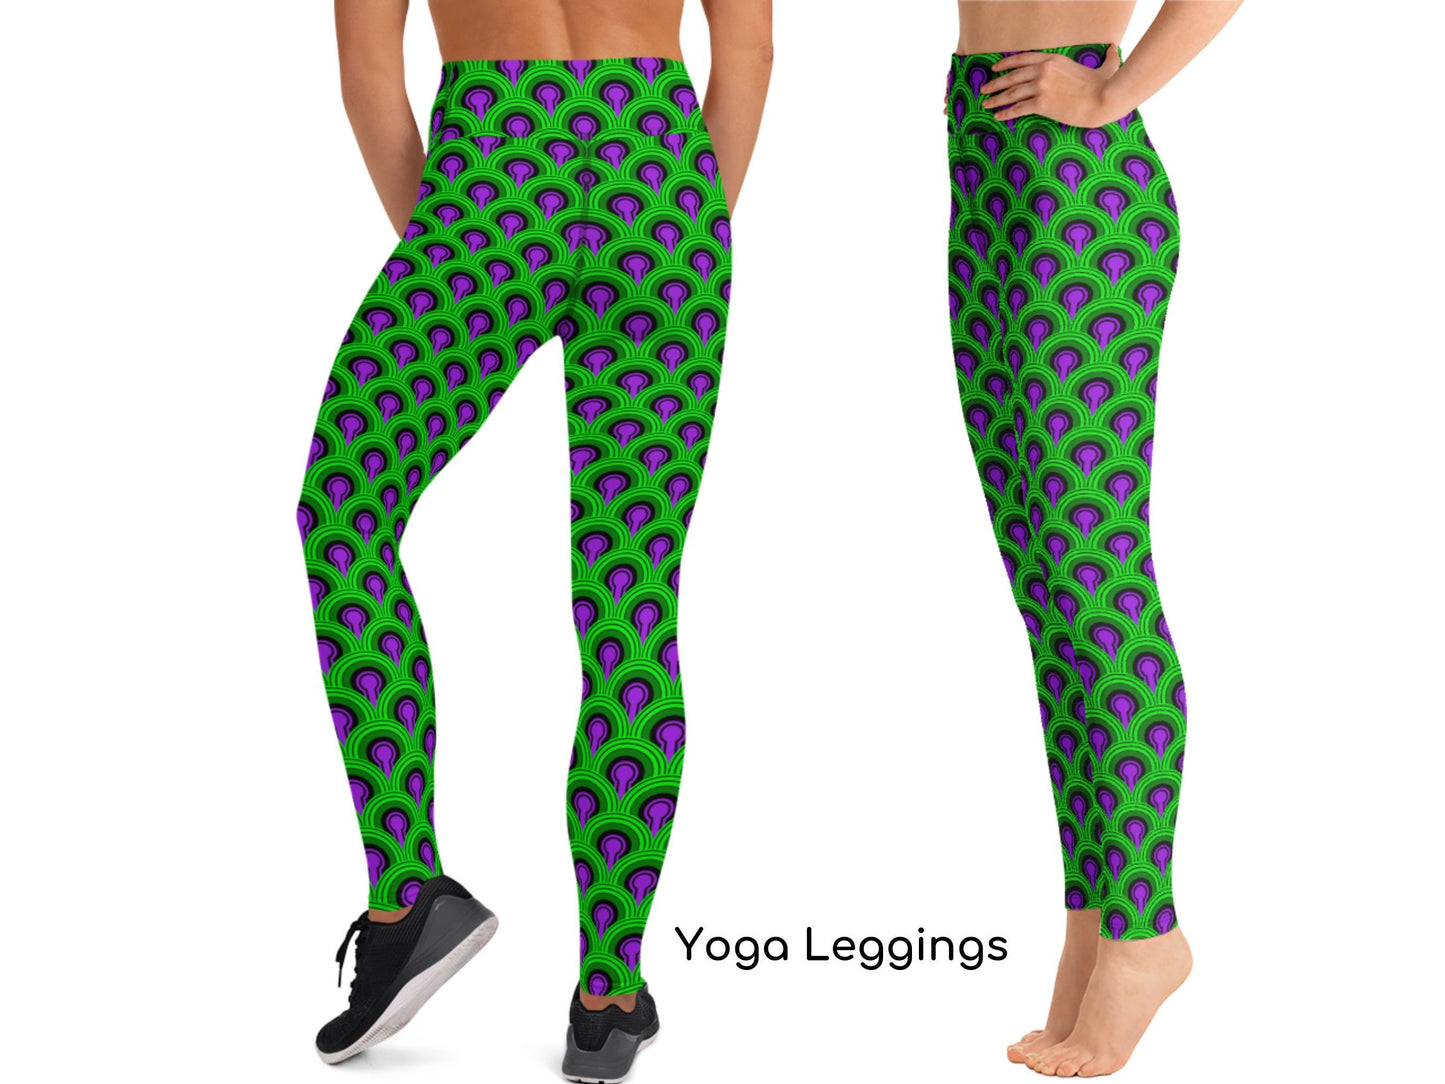 The Scary Hotel Sports Set, Yoga Leggings, Halloween, Cosplay, Gift for Her, Room 237, Horror, Birthday Gift